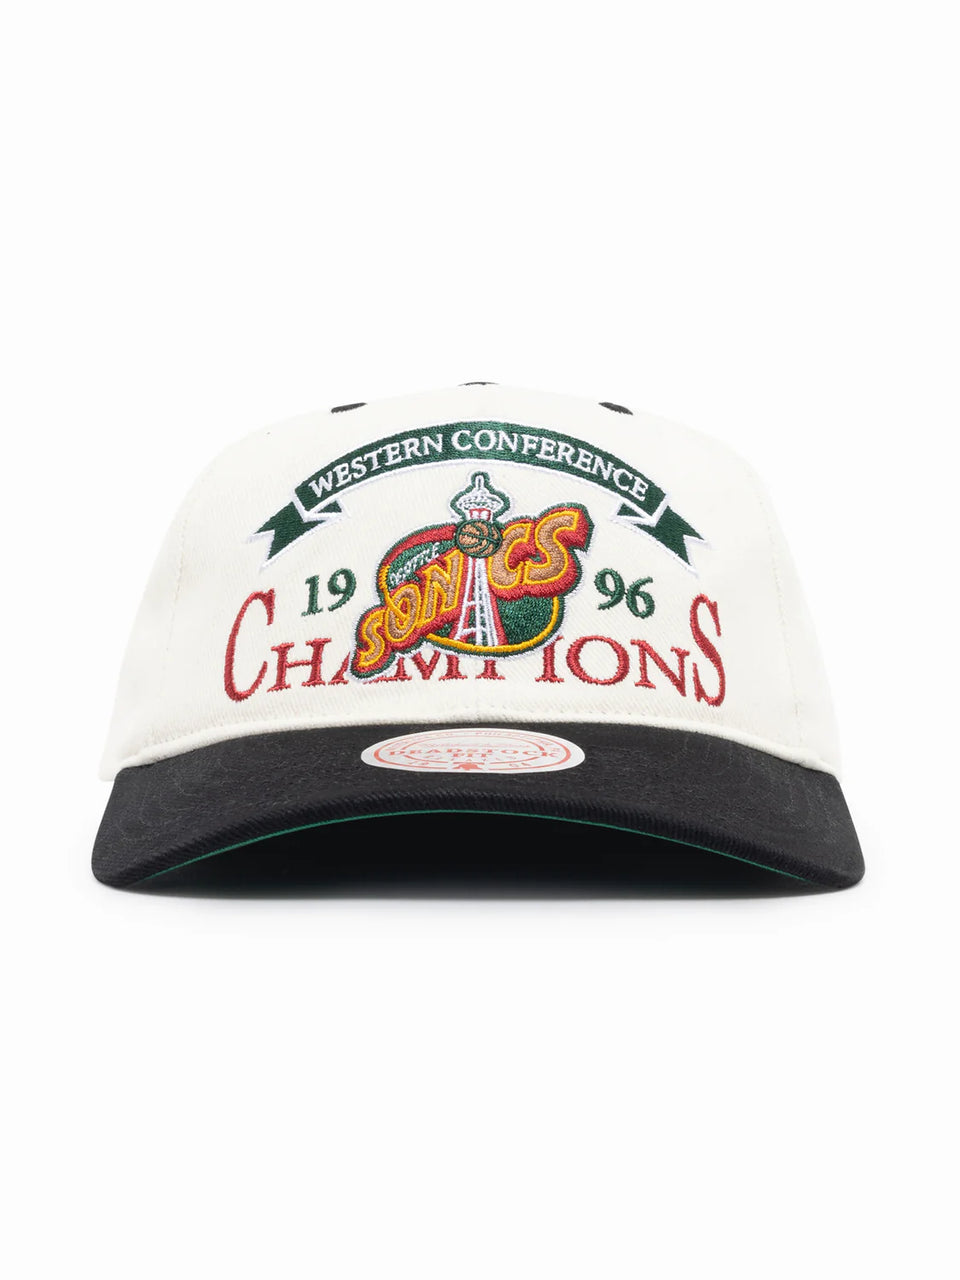 Mitchell & Ness 96 Conference Champs Sonics - Off White